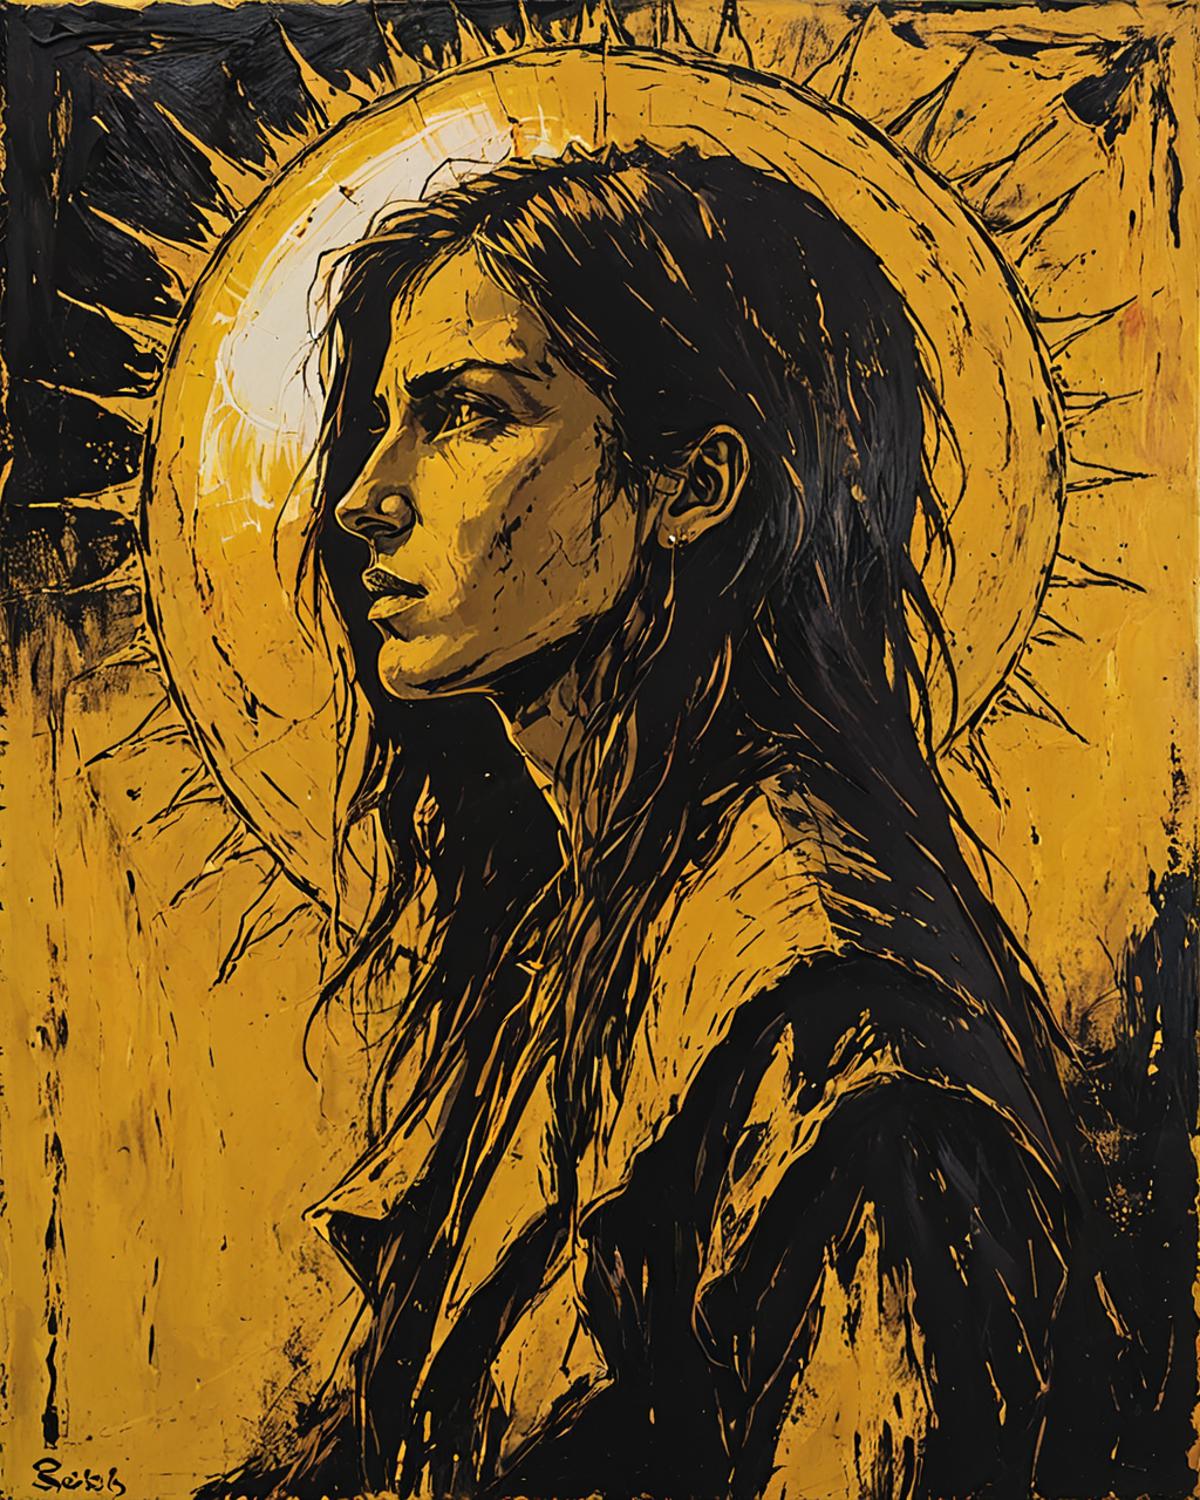 A black and yellow drawing of a woman with long hair and a sun in the background.